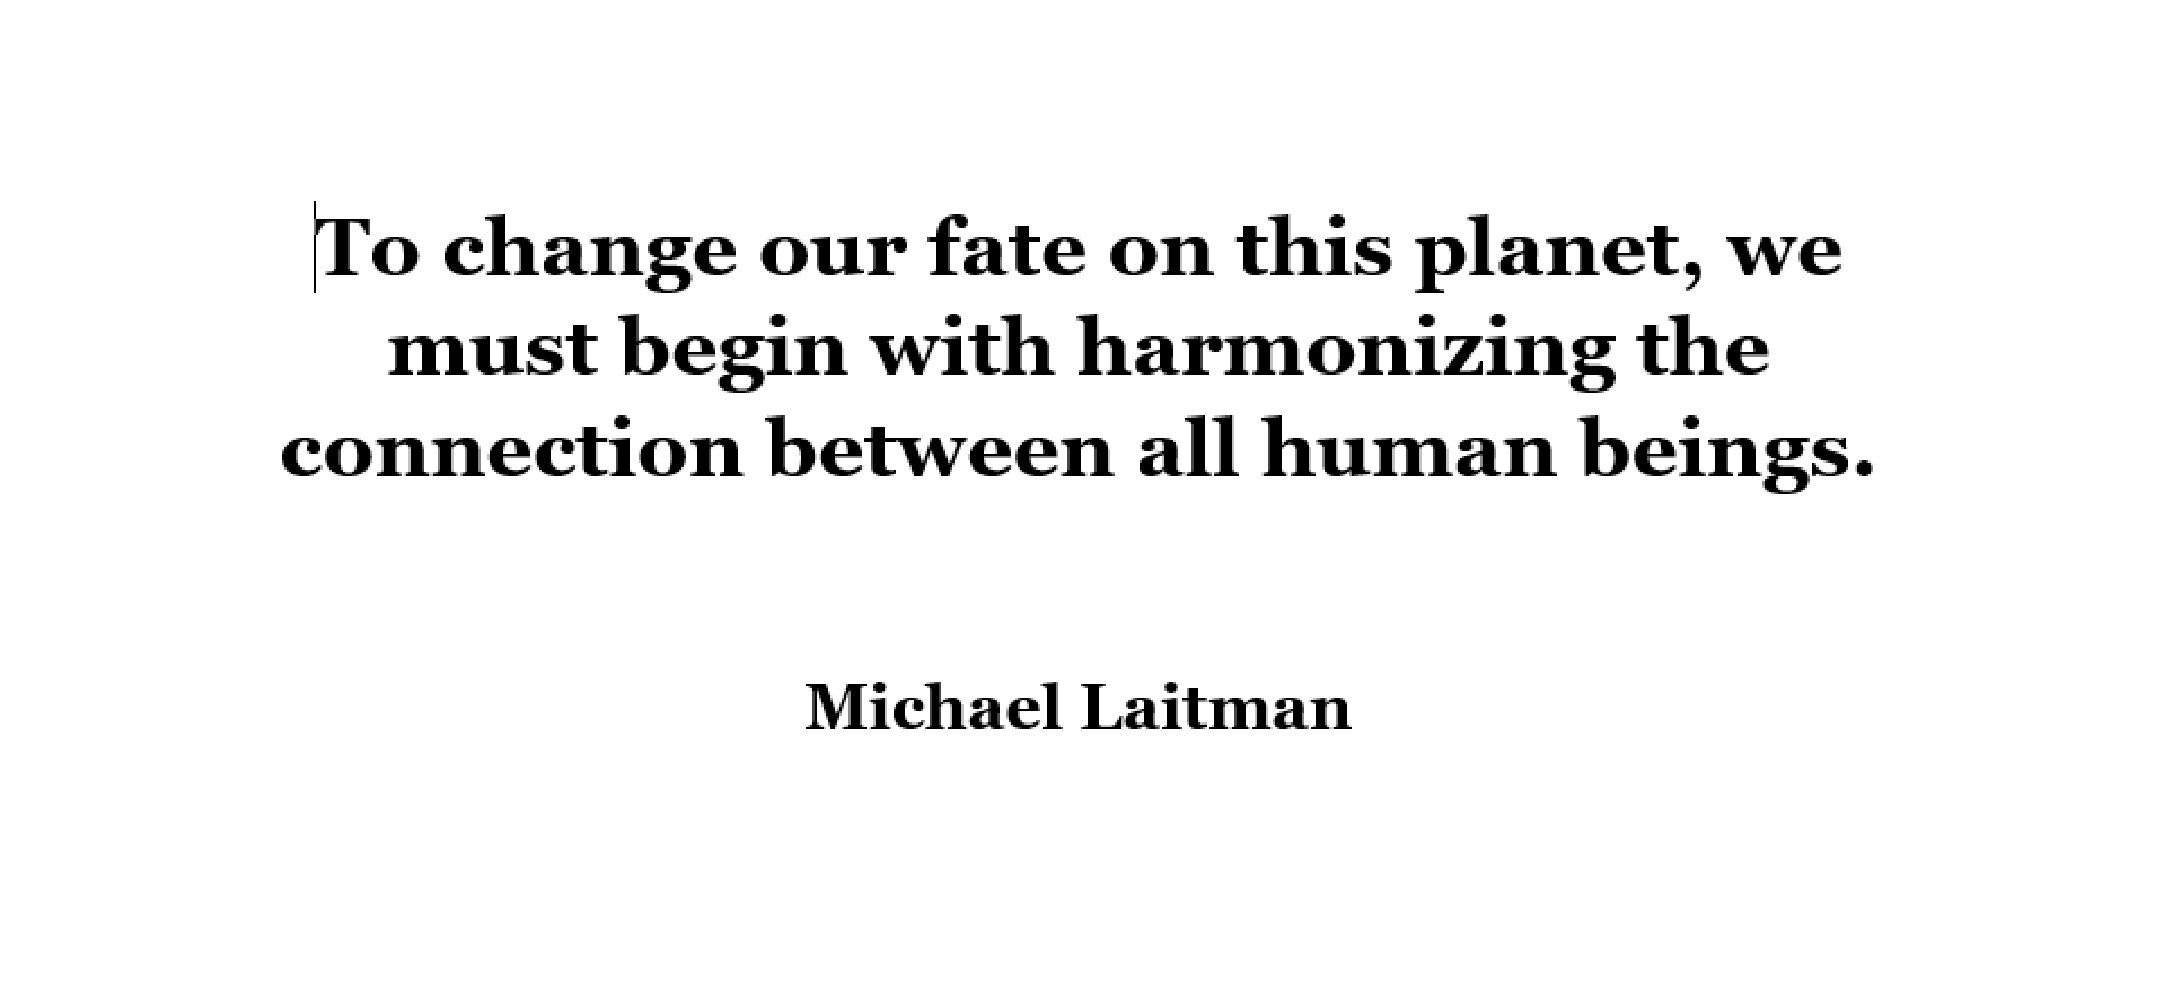 Quote by Dr. Michael Laitman